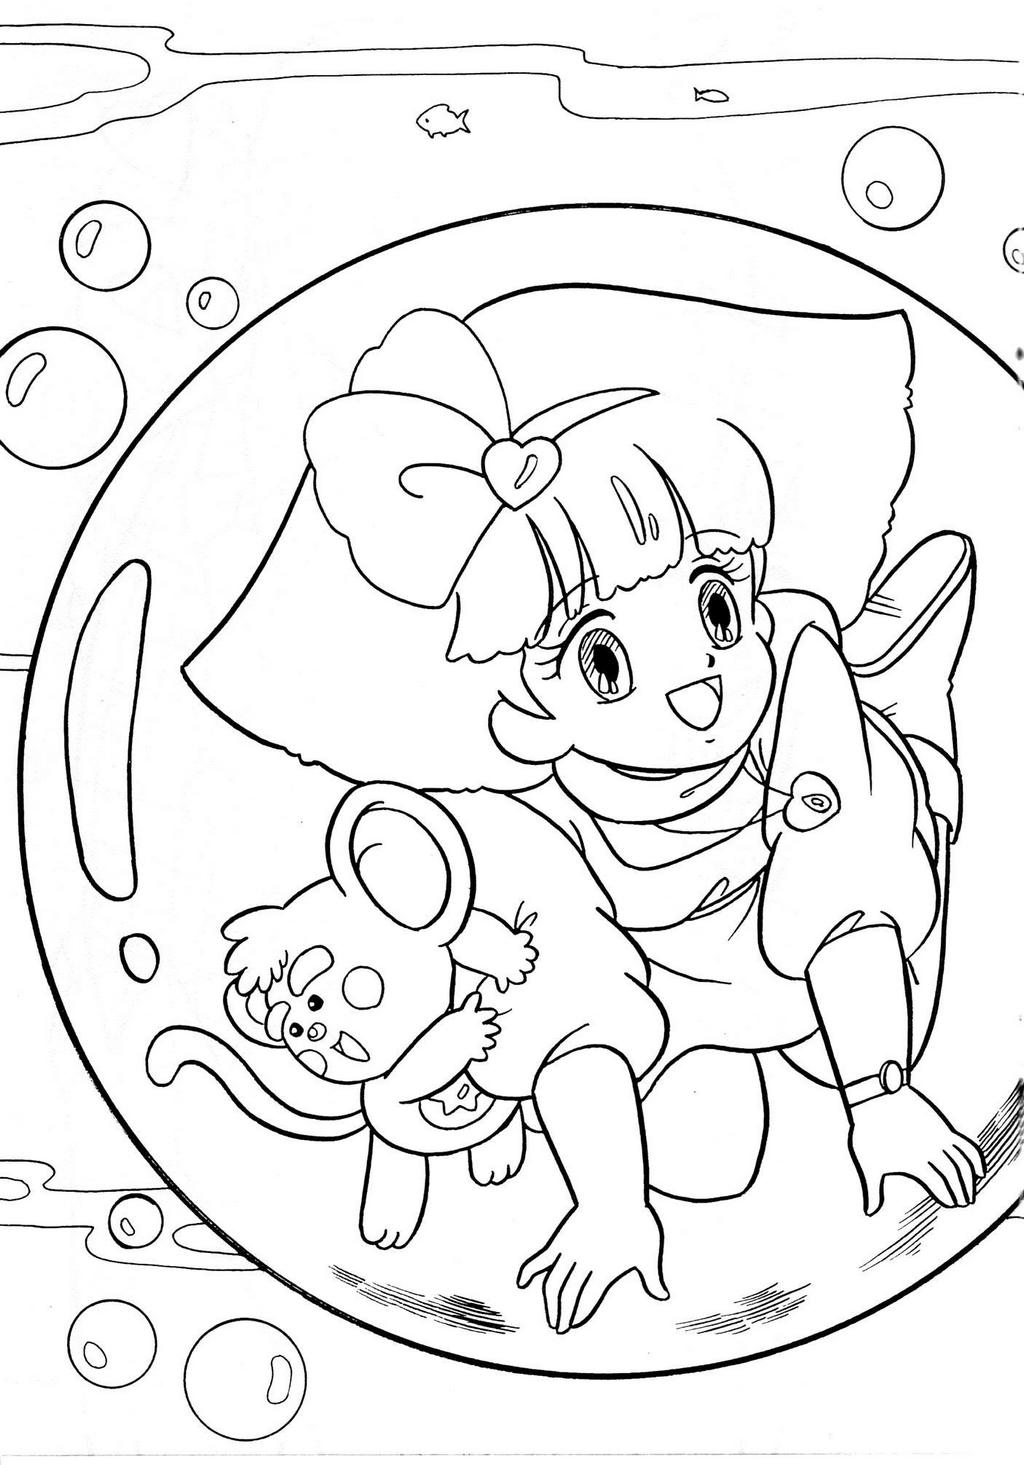 Minky Momo Printable Coloring Pages for Girls.